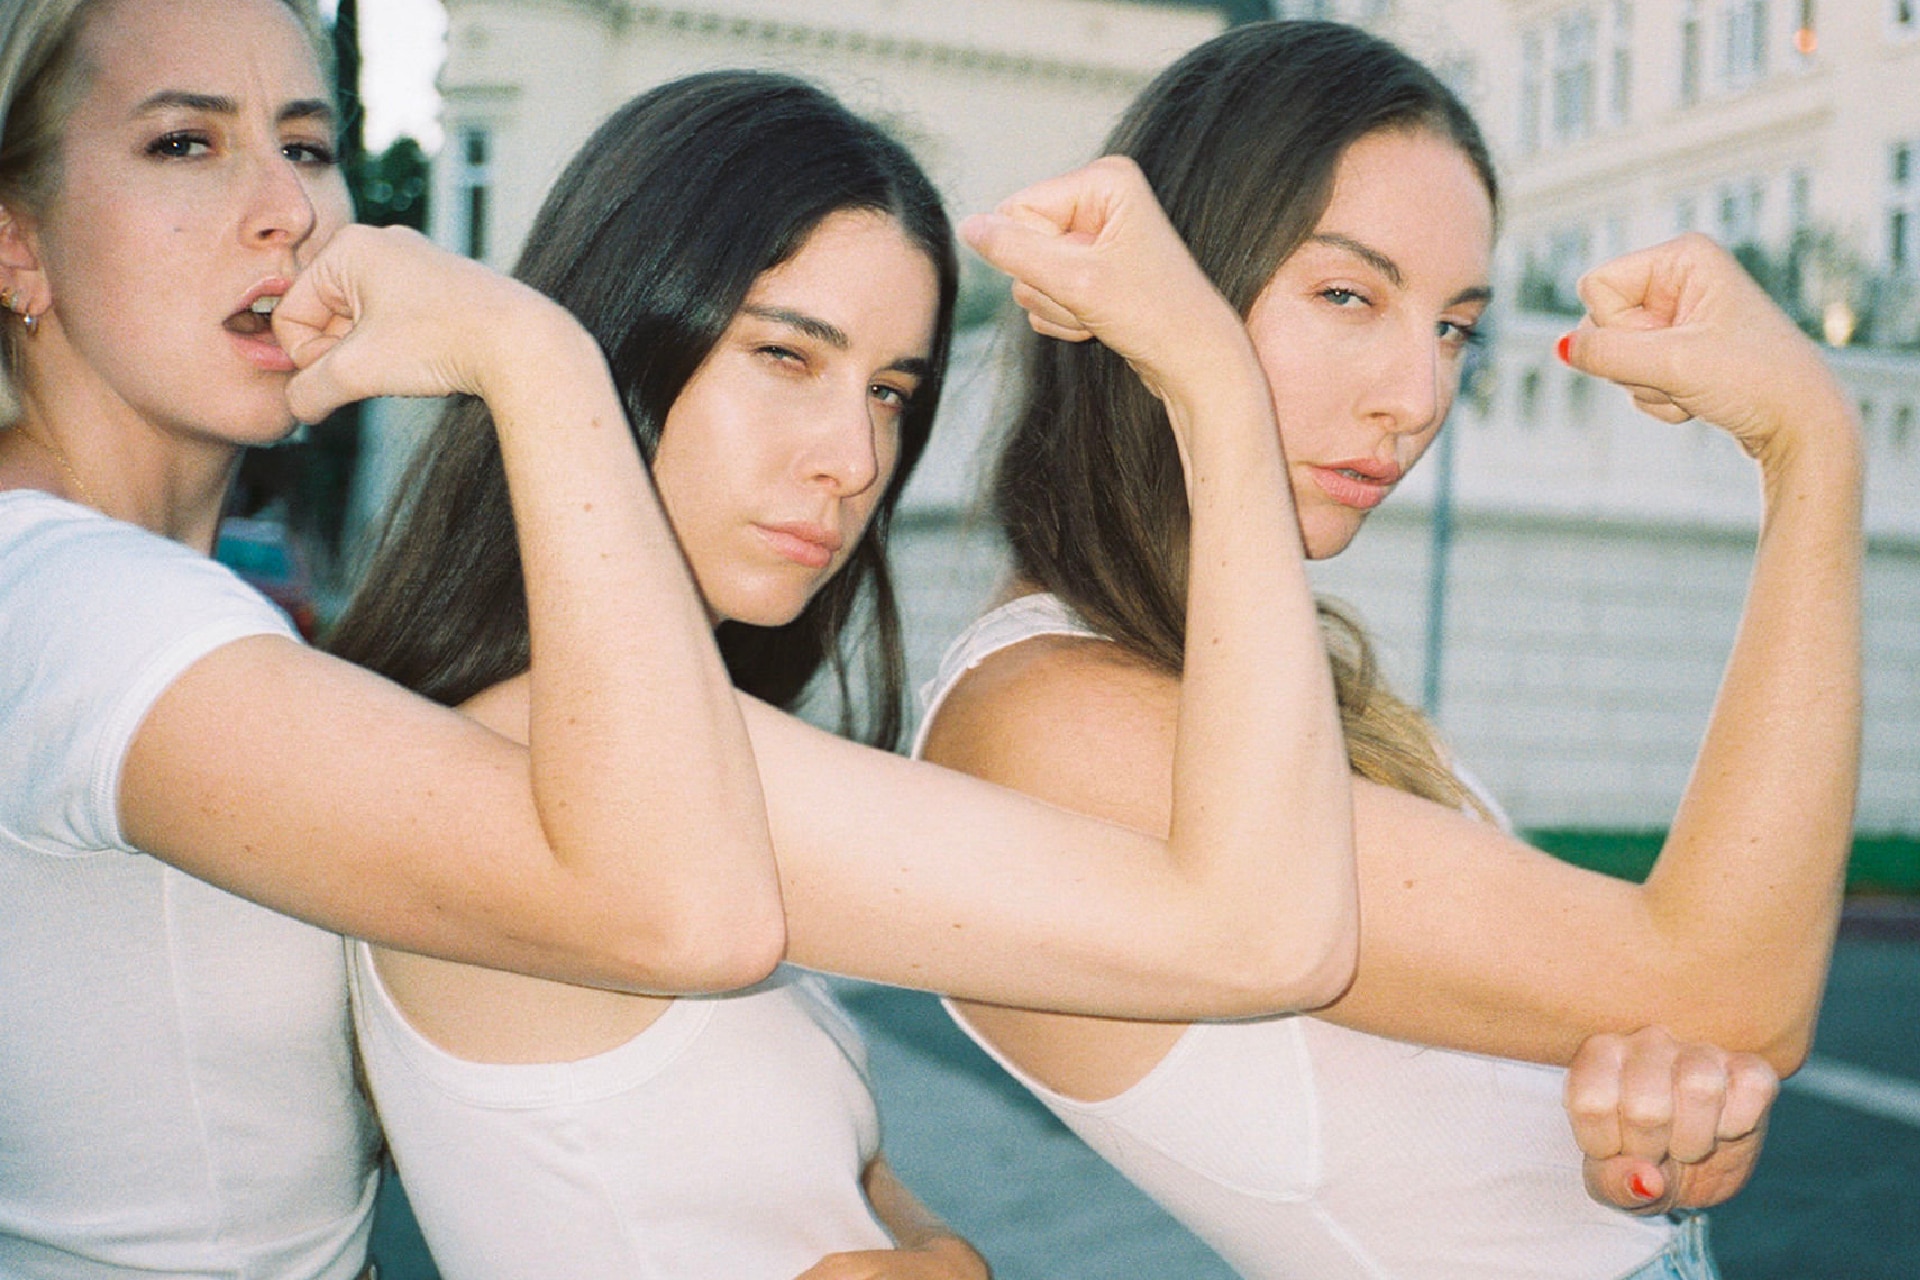 The Haim Sisters Show Off Their Dance Moves in New Louis Vuitton